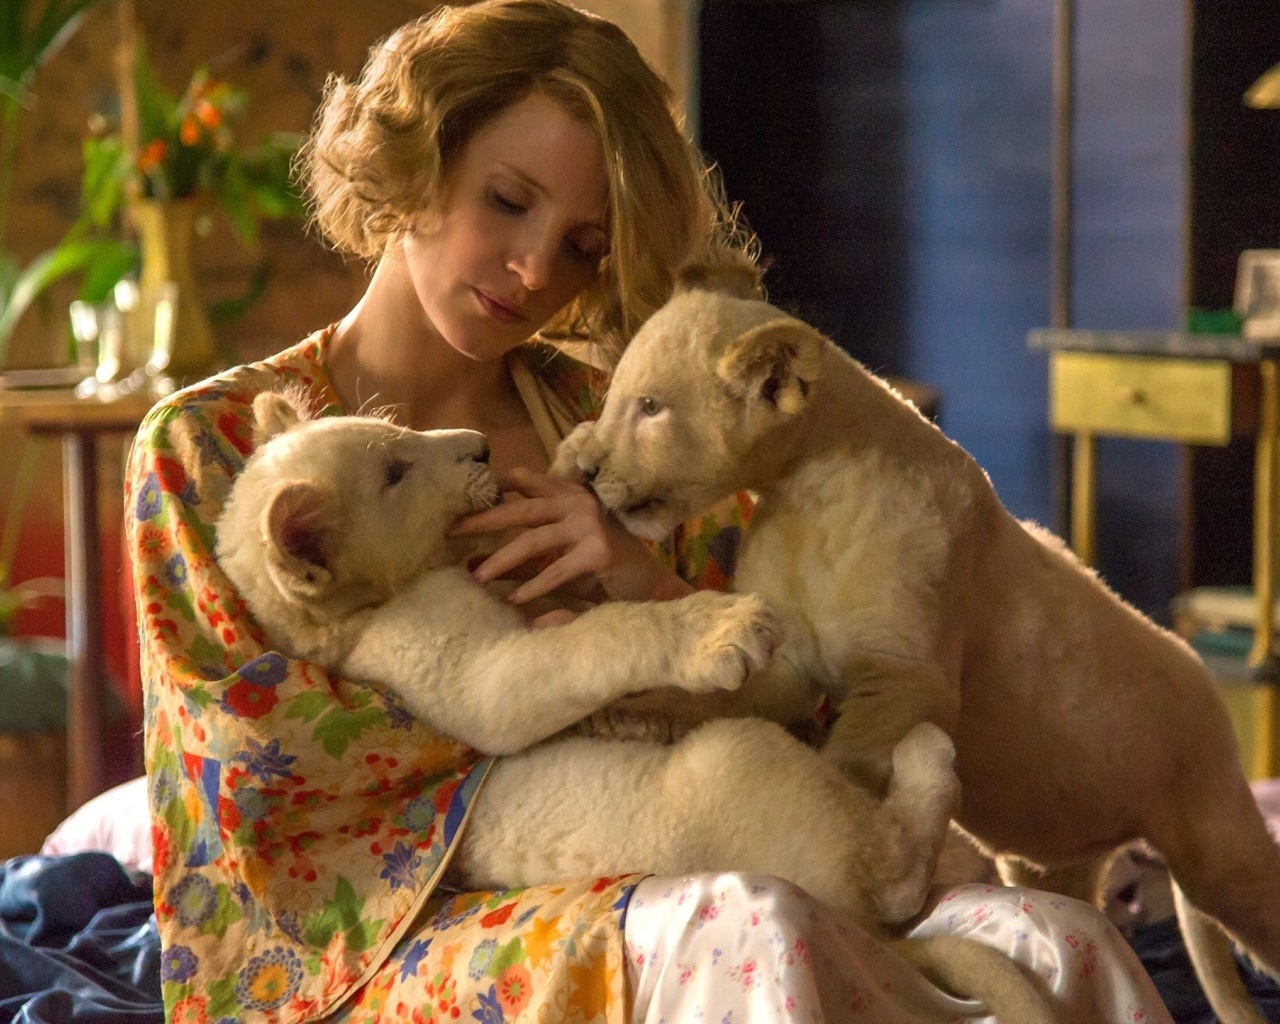 Das The Zookeepers Wife Film with Jessica Chastain Wallpaper 1280x1024